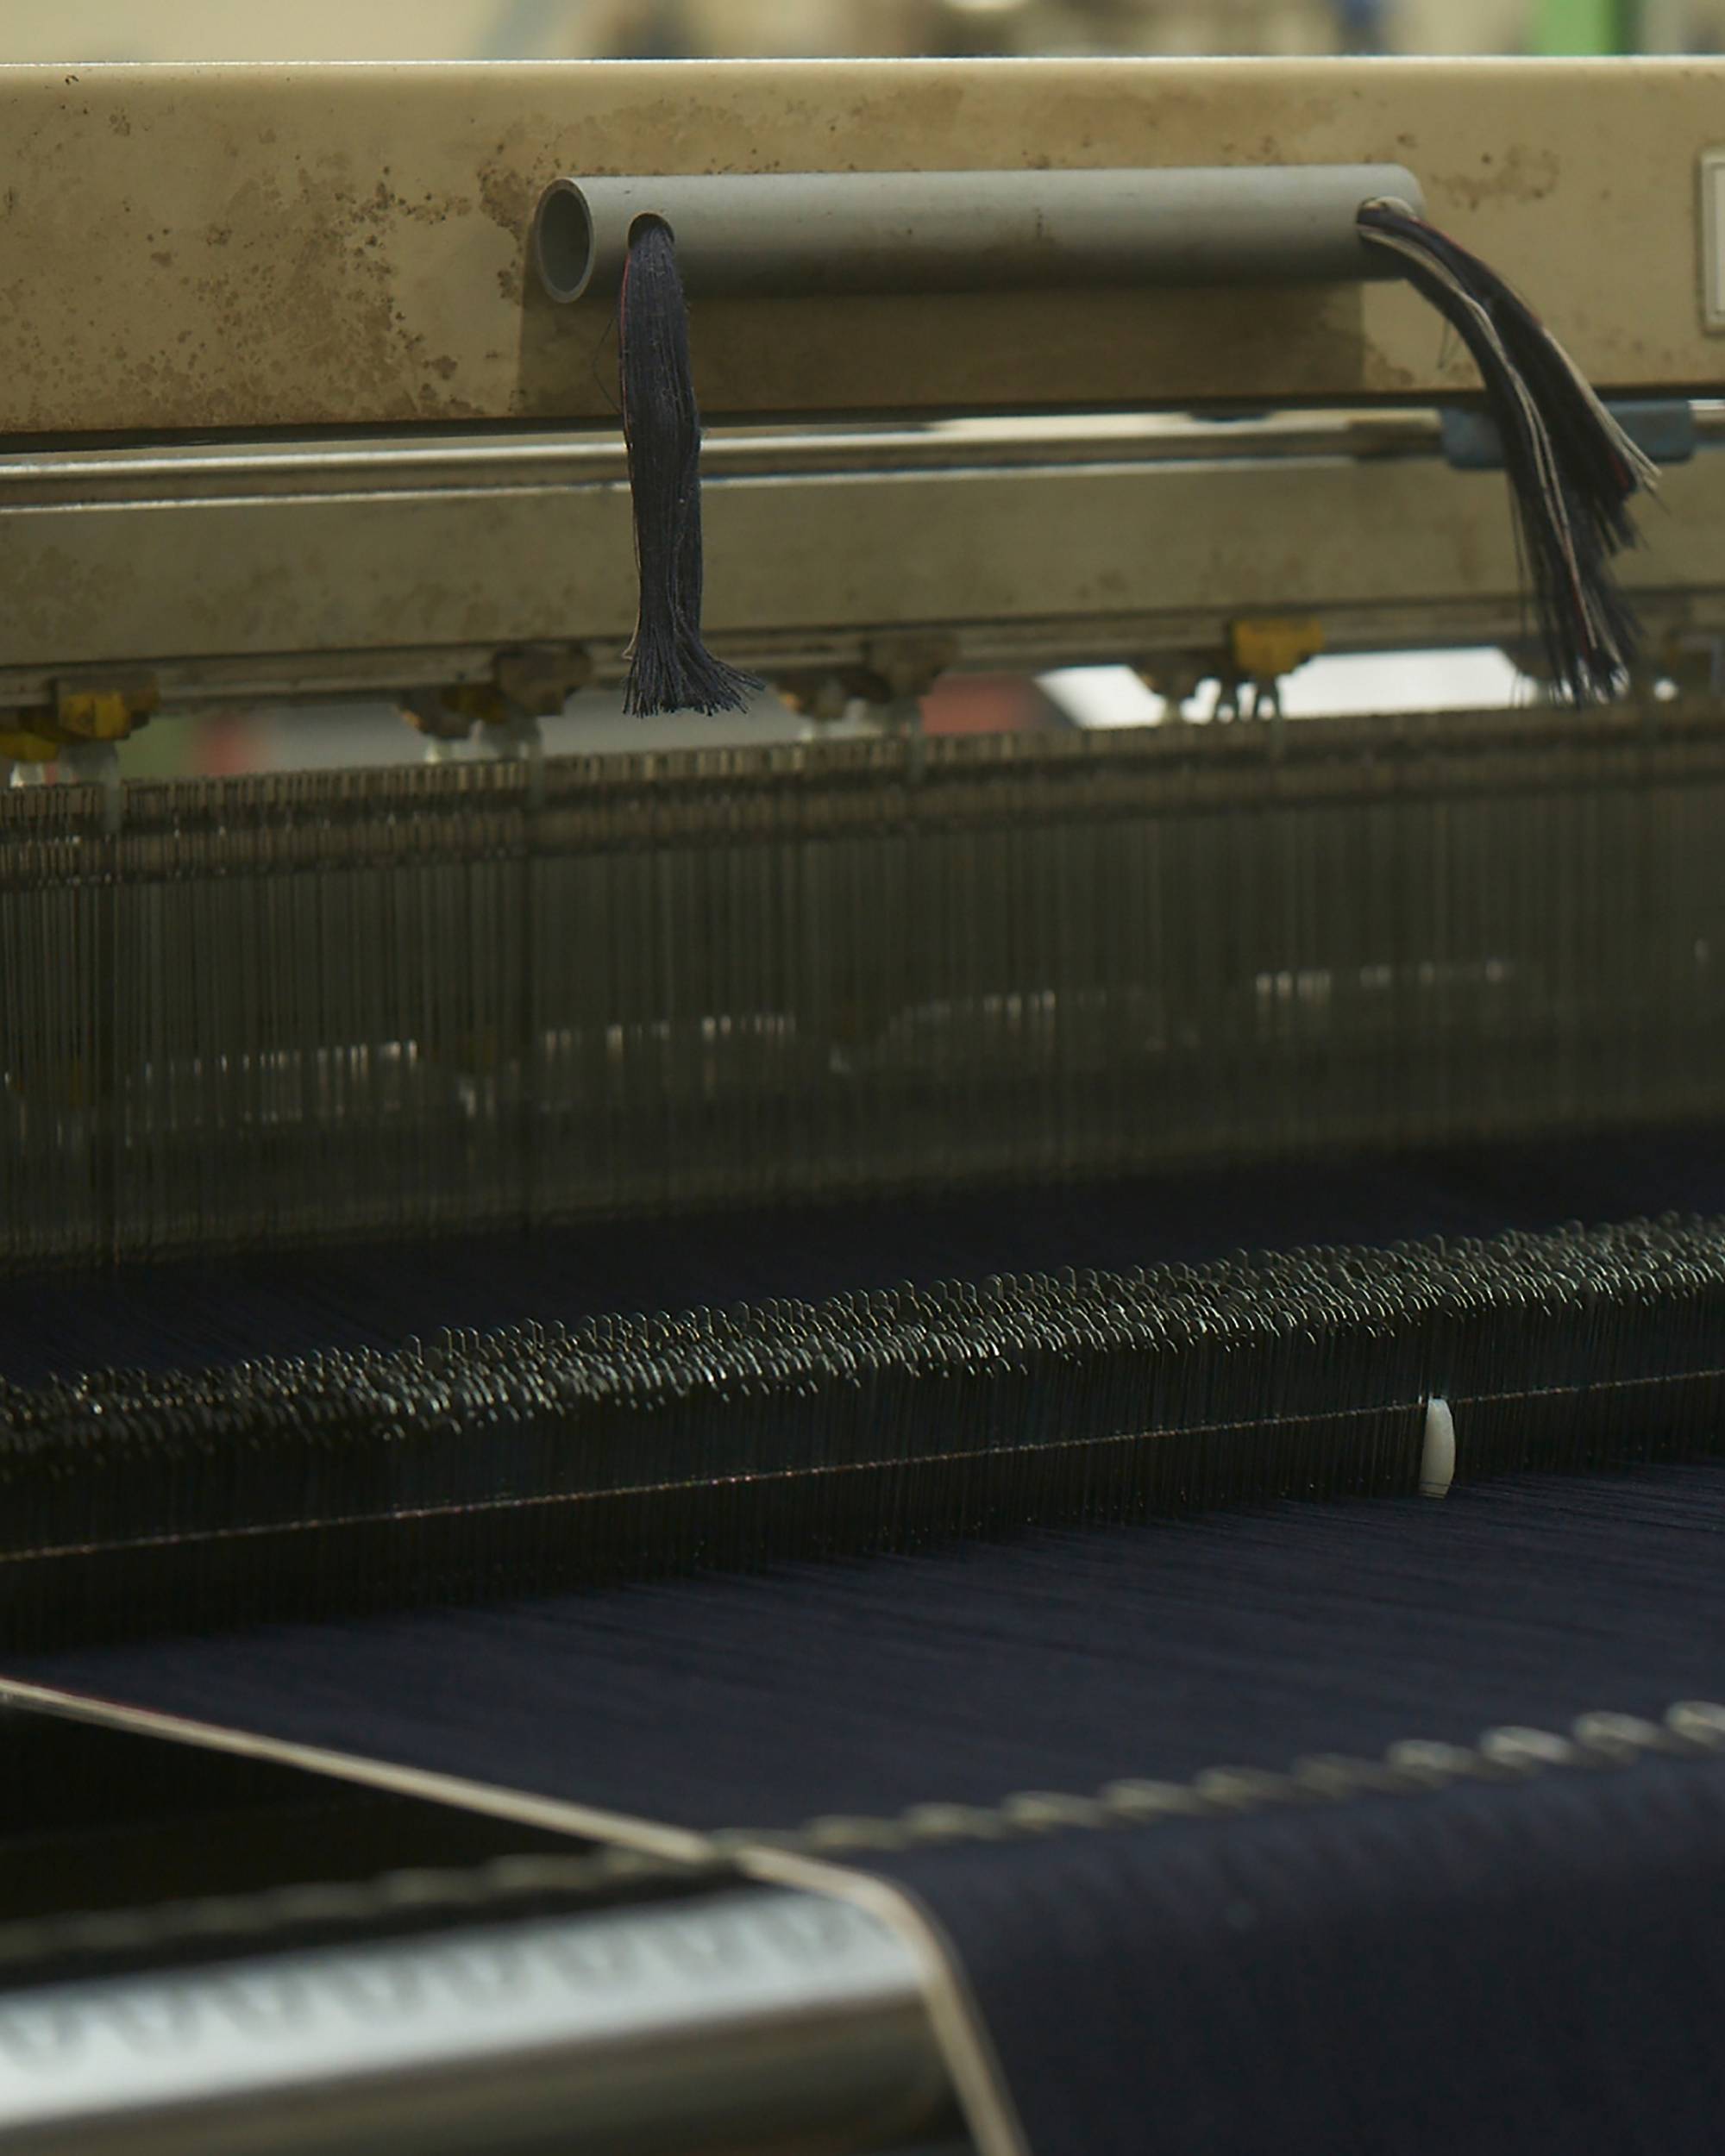 Levi’s® Made & Crafted® showing processes of manufacturing at Japan’s Kaihara Denim Mills.